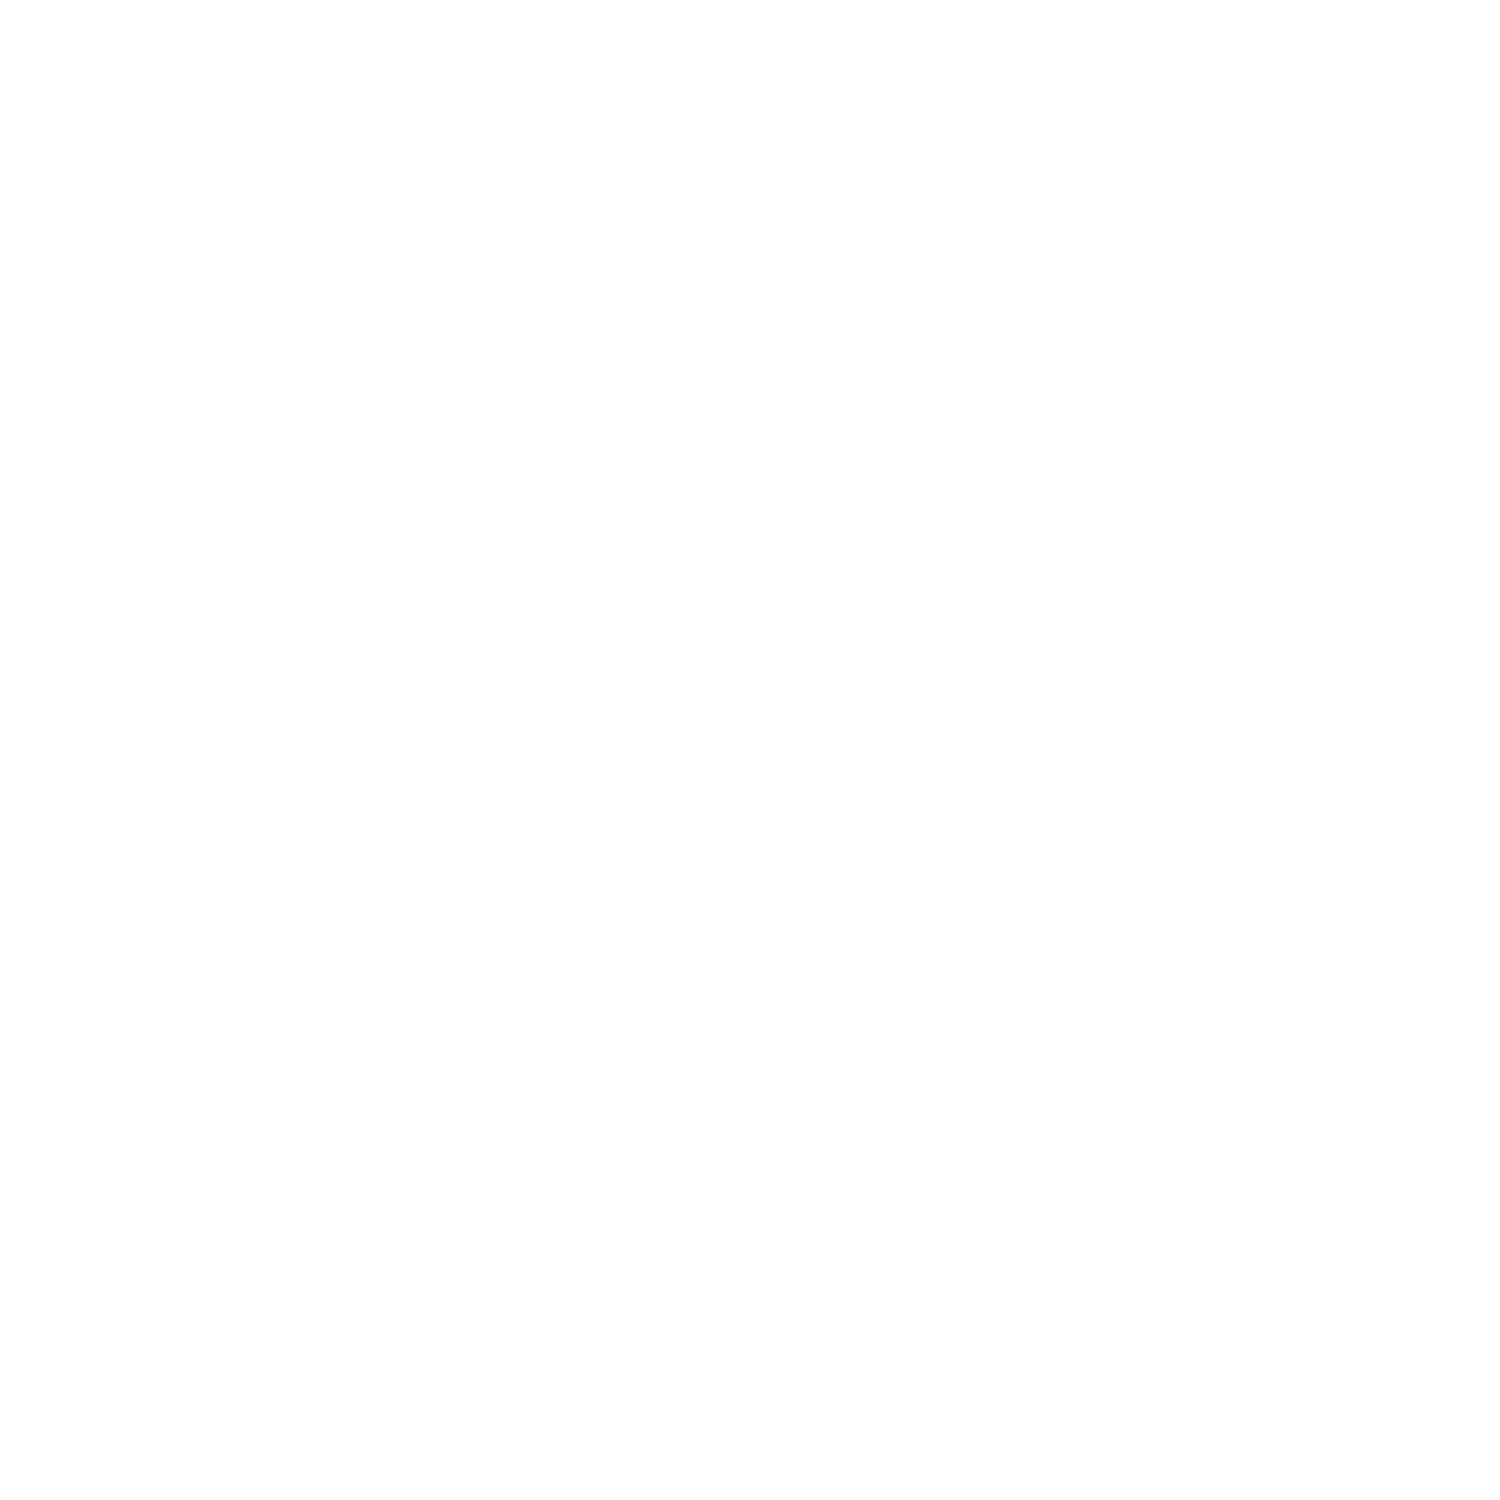 The Practice of Blooming